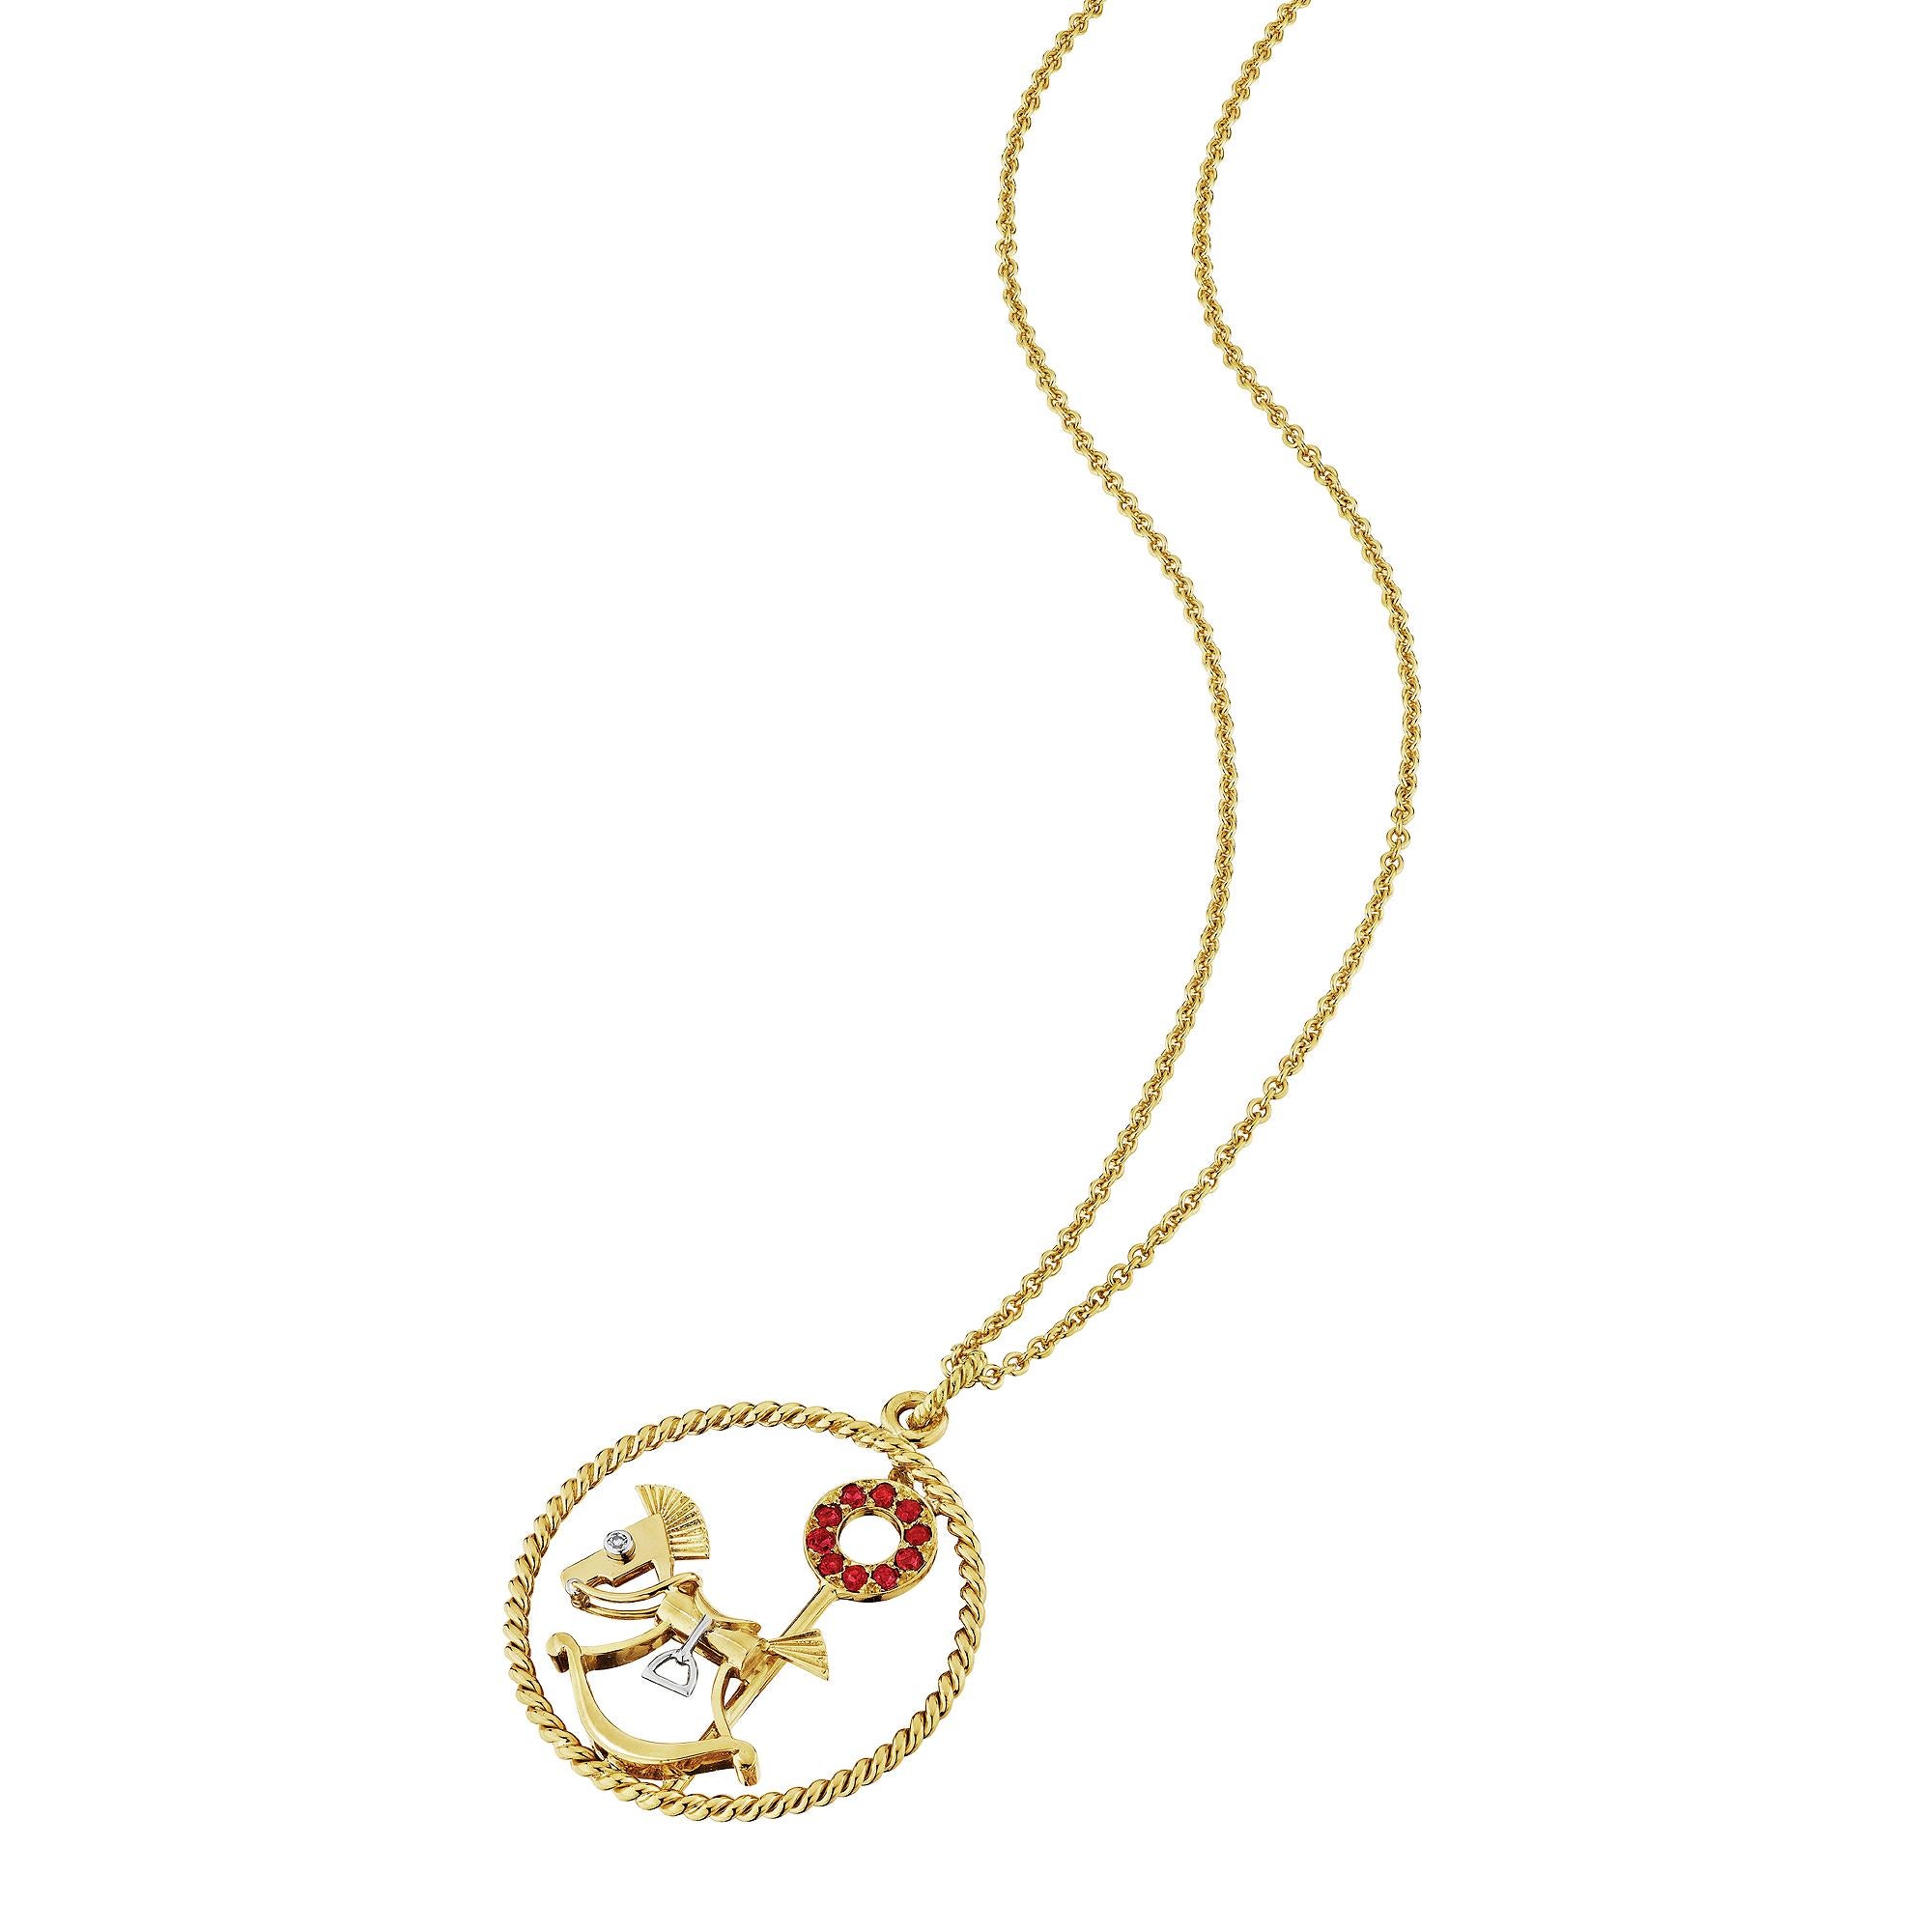 Giddy up!  Giddy up!  And take a ride on this whimsical Van Cleef & Arpels mid-century diamond, ruby, 18-karat yellow gold, and platinum rocking horse pendant charm necklace.  Signed Van Cleef & Arpels.  Serial number 69688.  Circa 1955.  Diameter 1